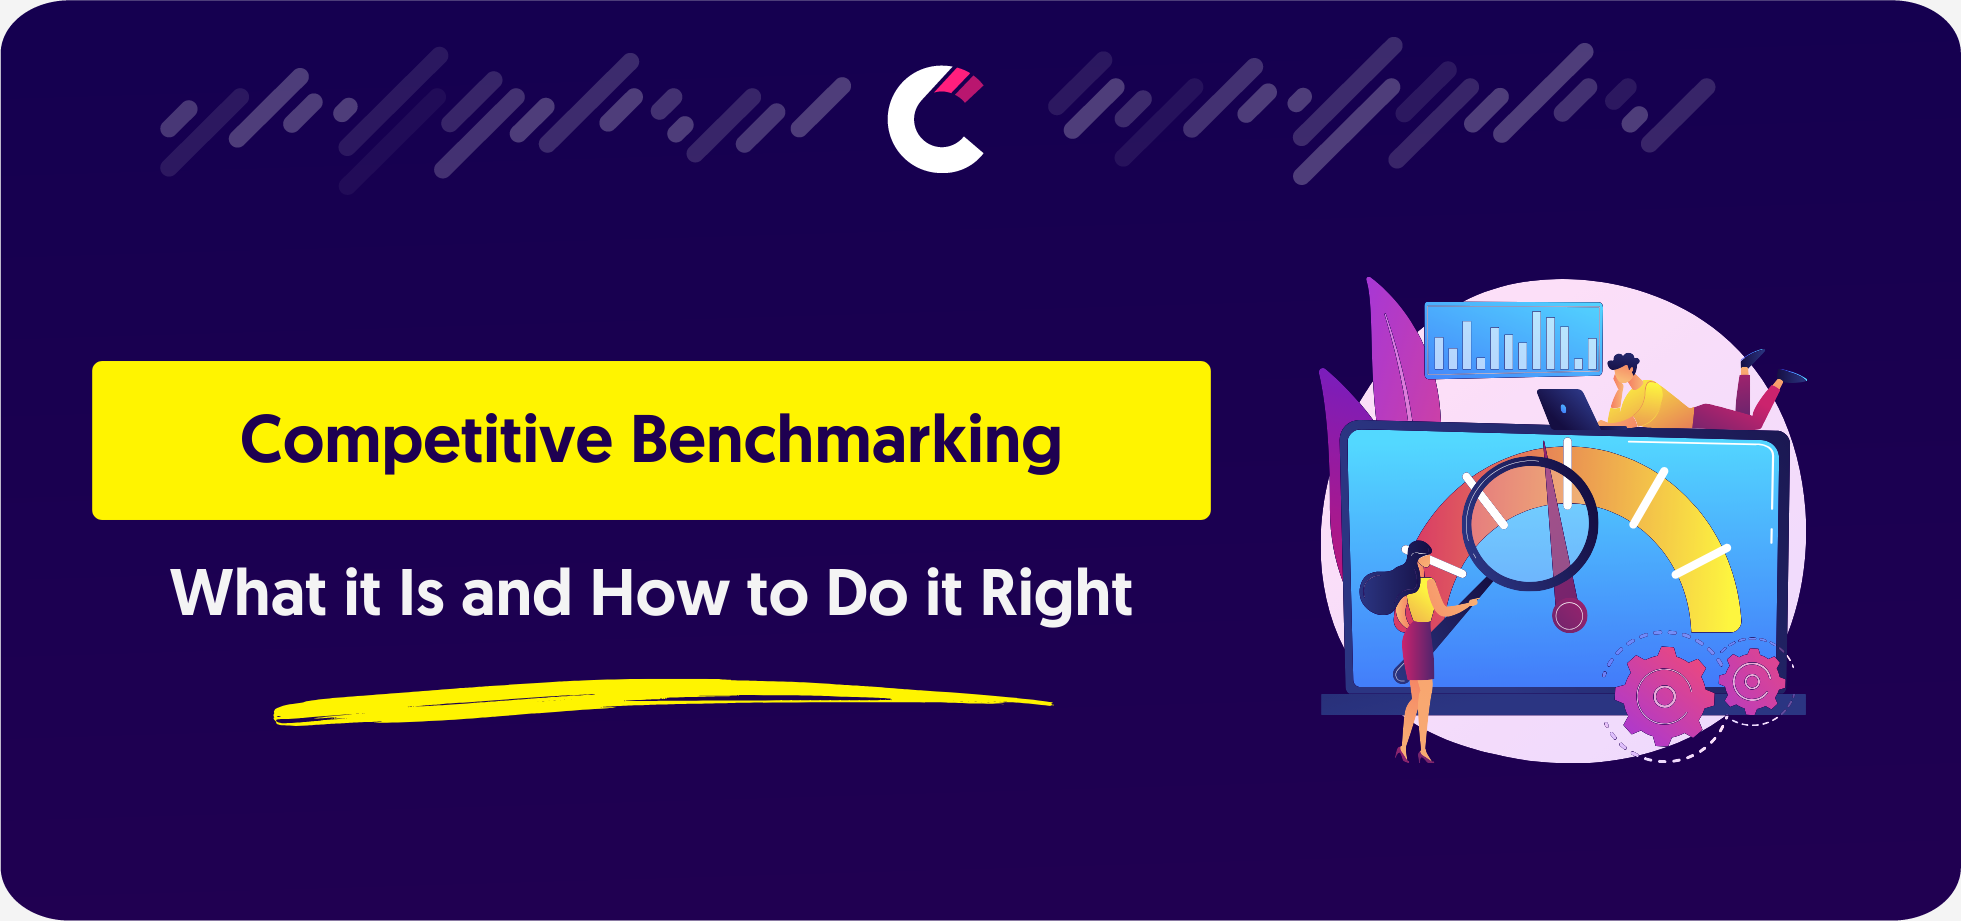 Competitive Benchmarking What it Is and How to Do it Right